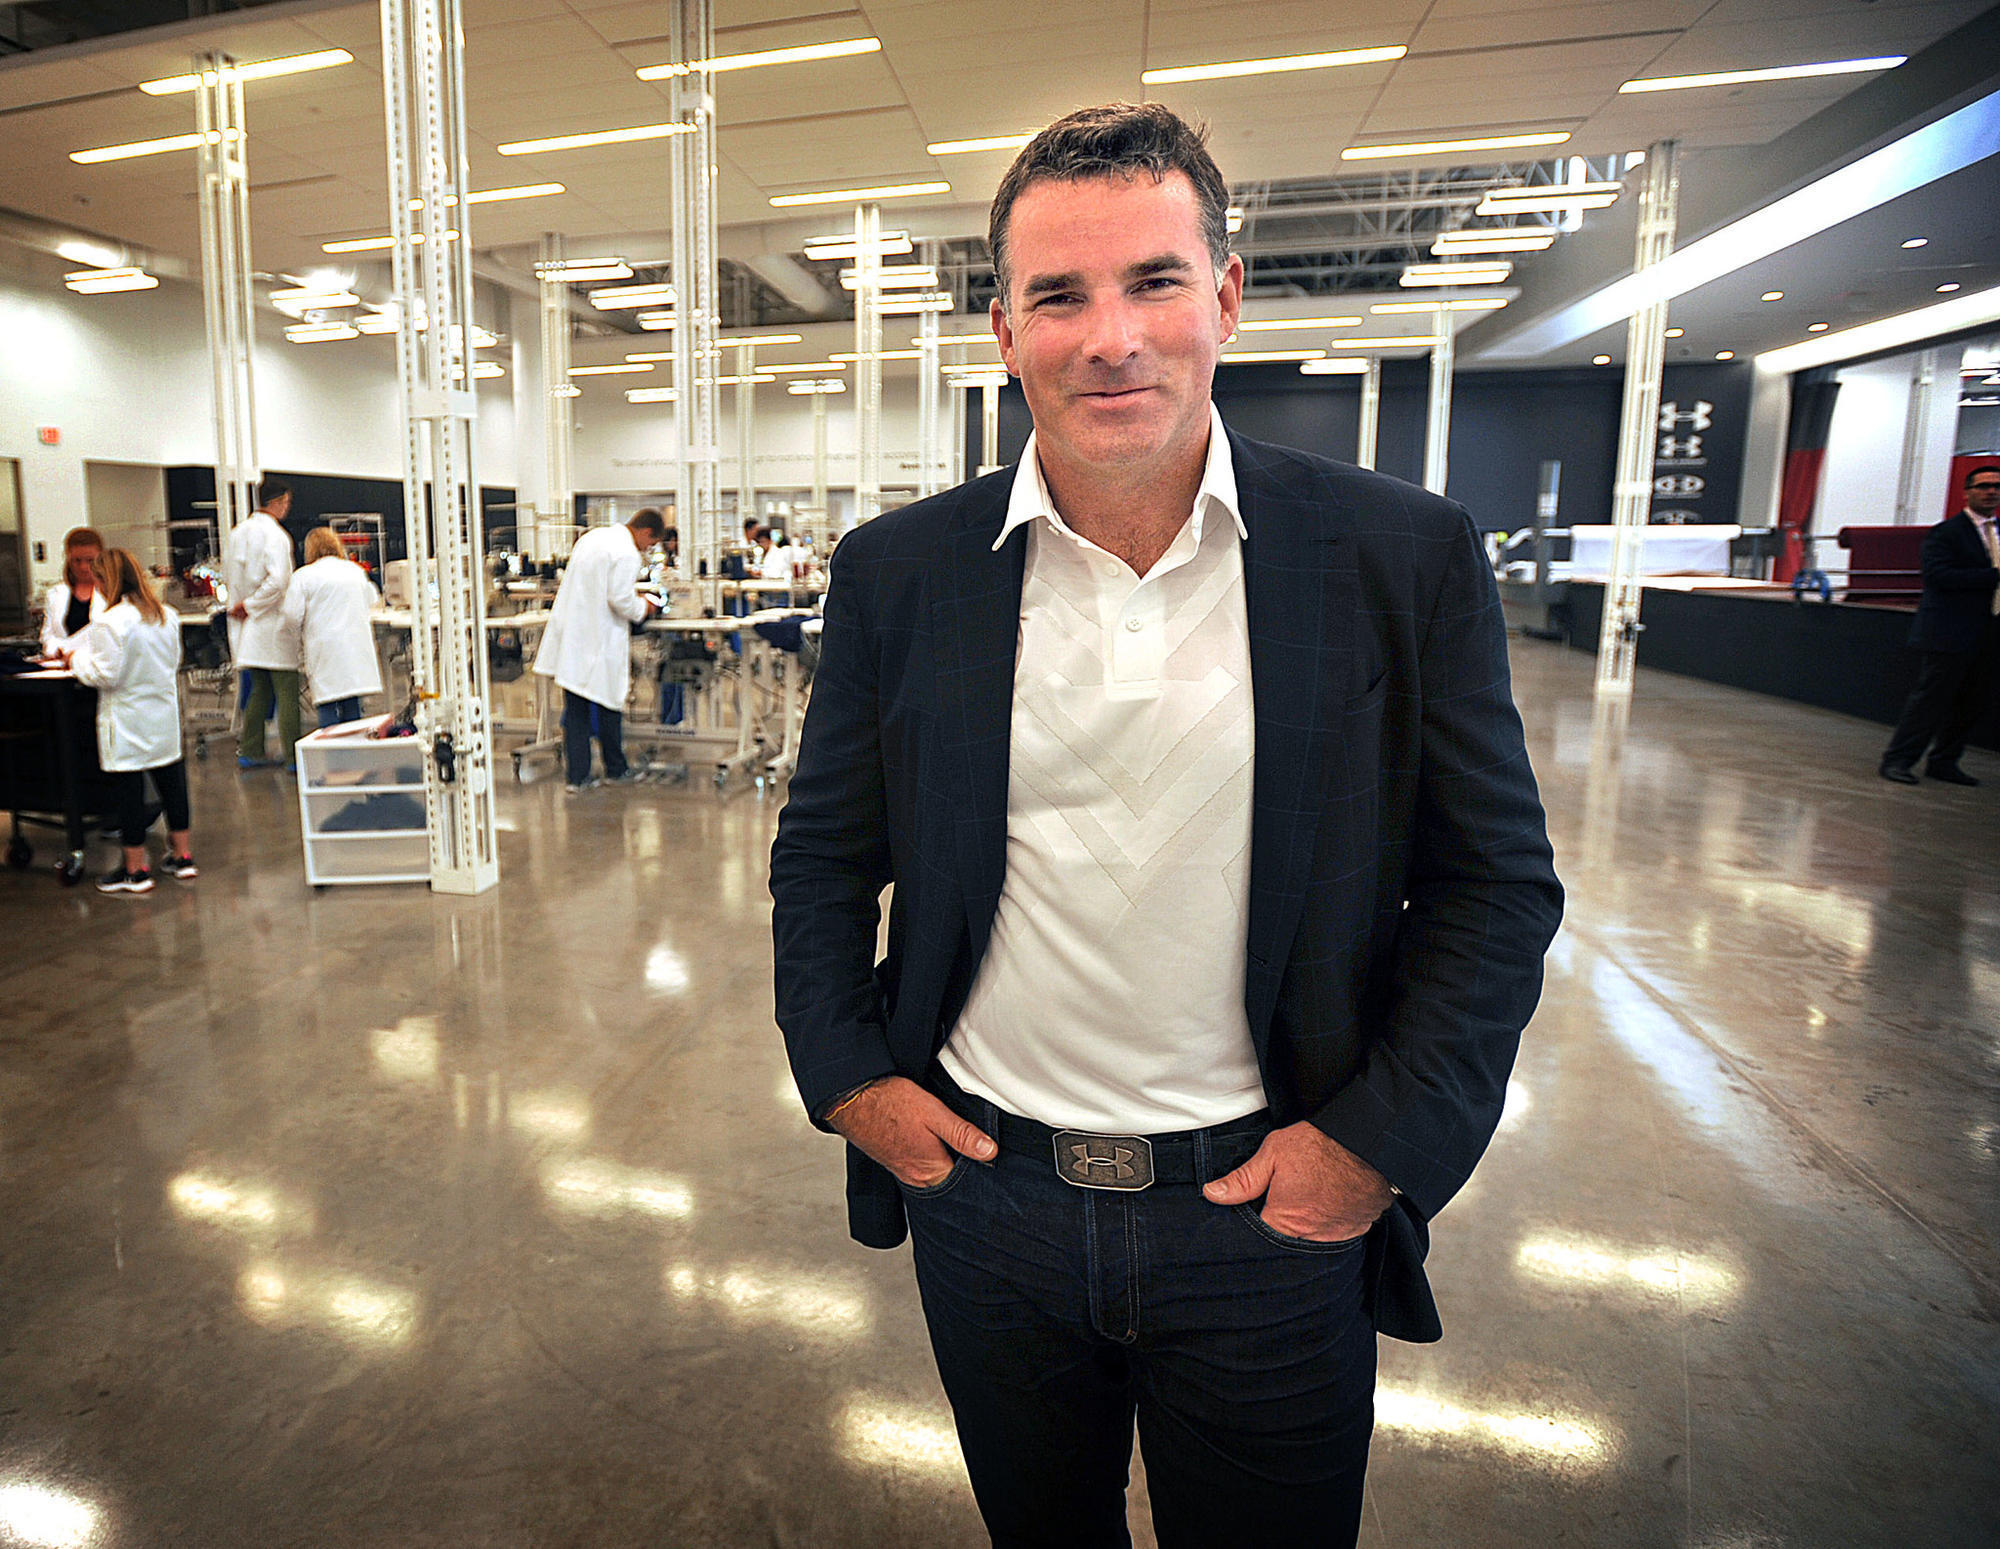 Under Armour founder Kevin Plank lands on a 'Worst CEOs' list - Baltimore Sun